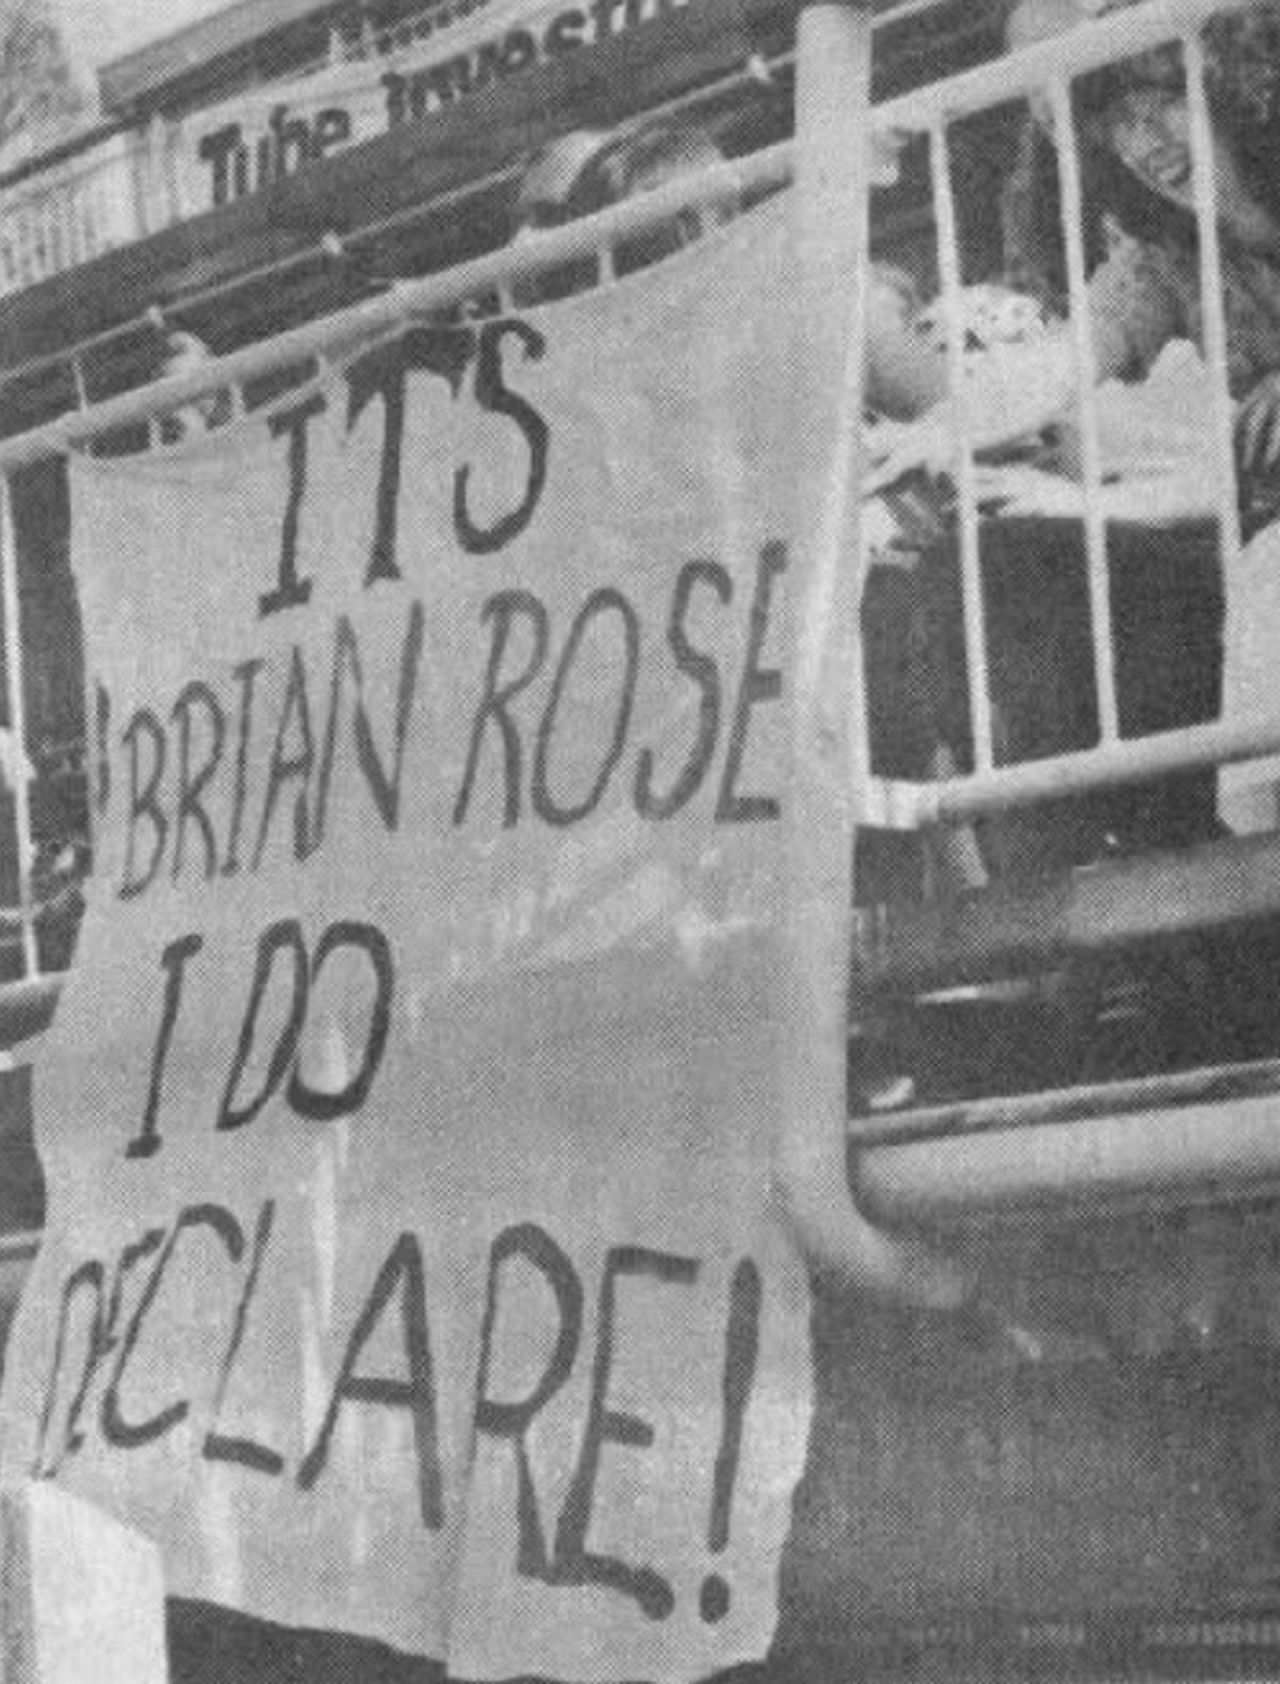 Brian Rose ribbed by spectators following his controversial declaration, May 1979